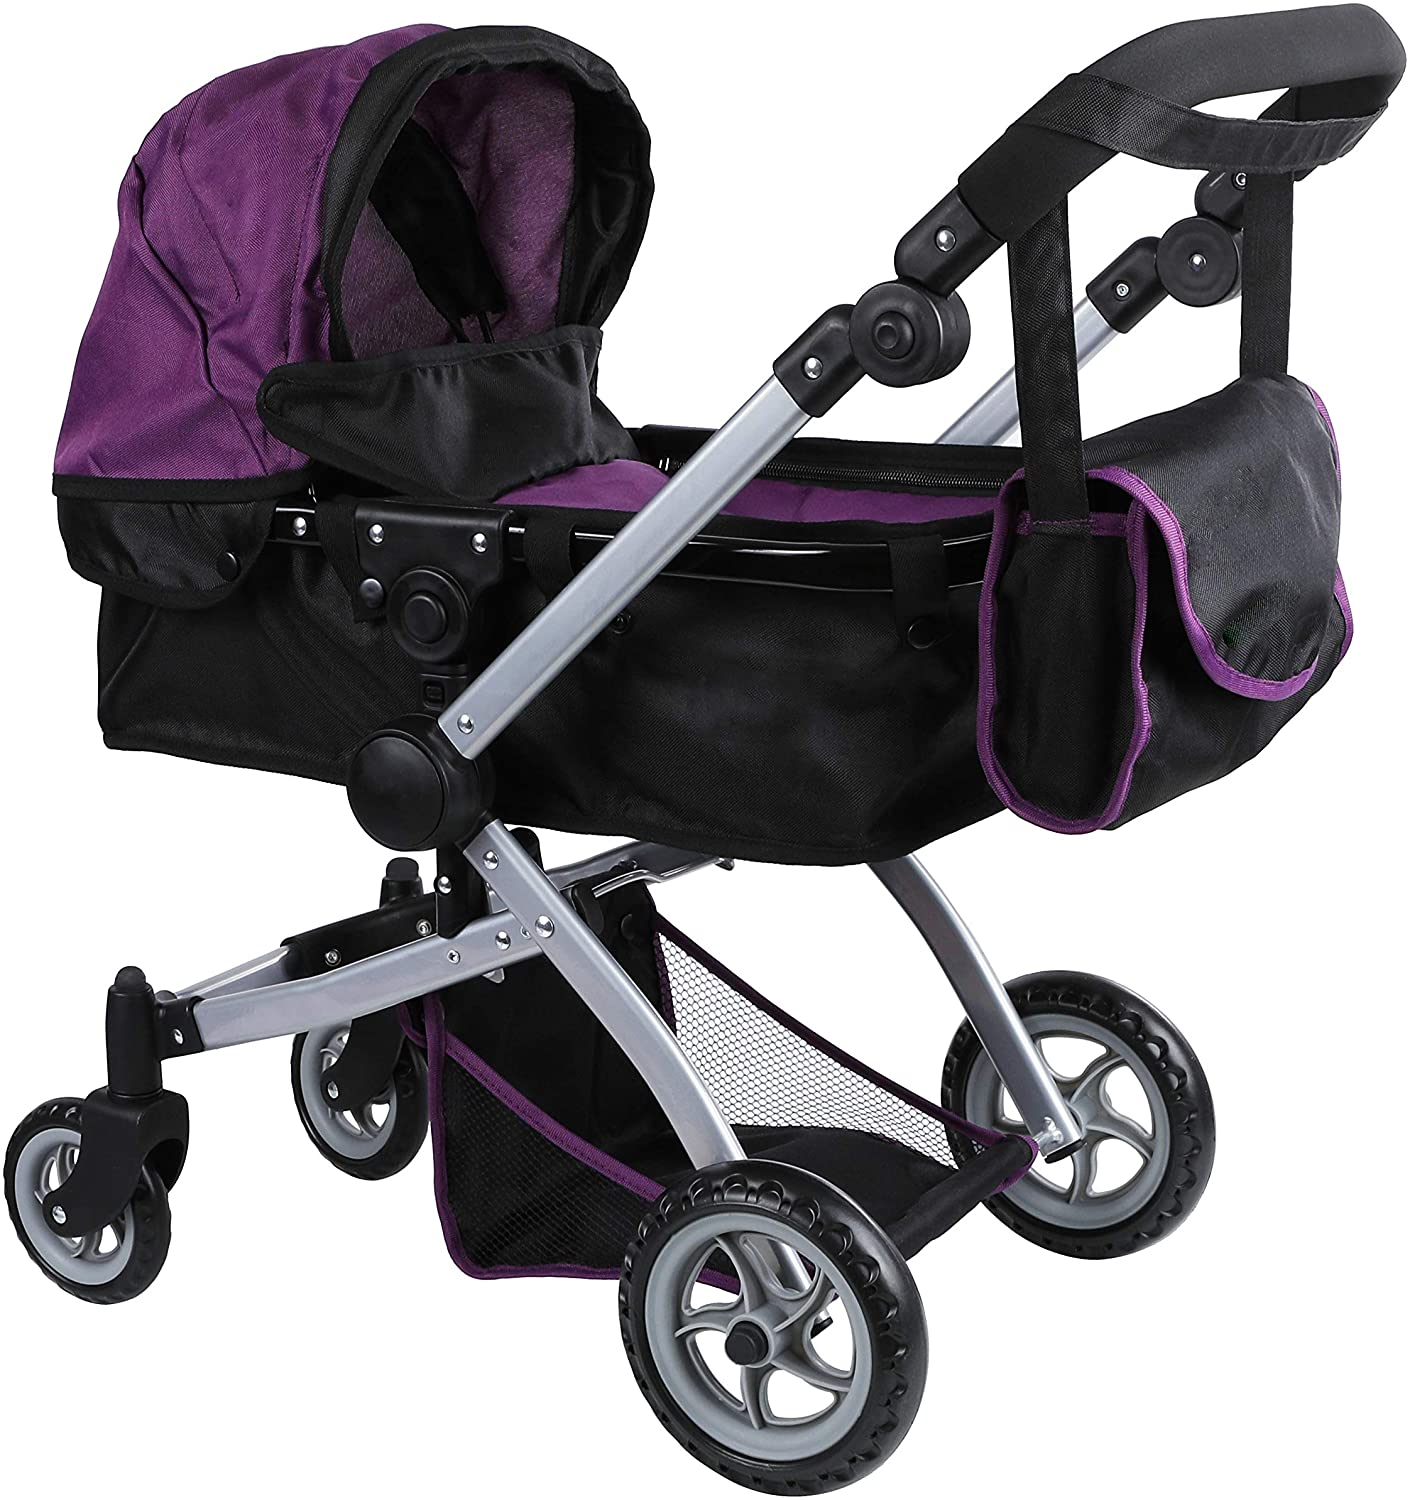 difference between pram and stroller